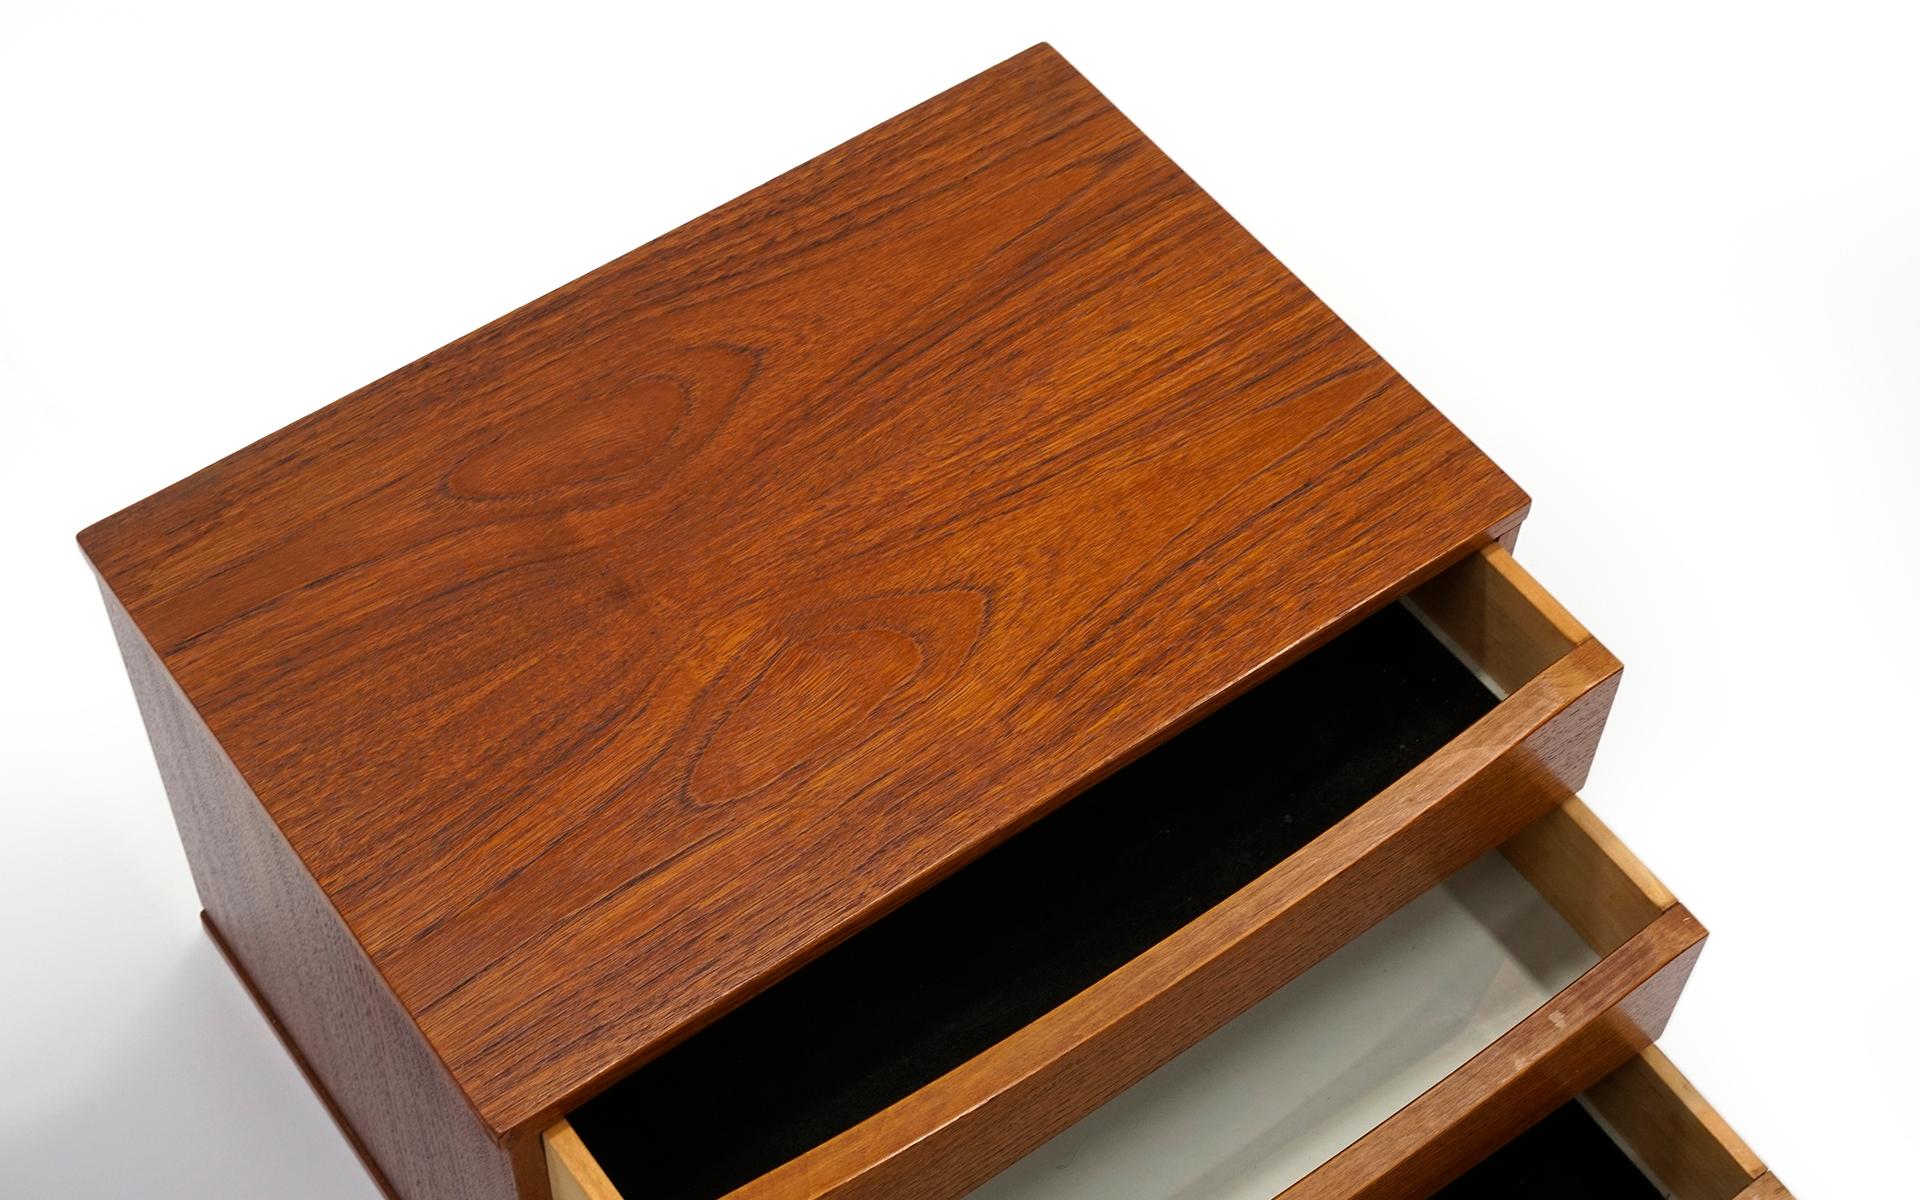 Mid-20th Century Pair of Danish Modern Teak Jewelry Cabinets by Arne Vodder for Sibast